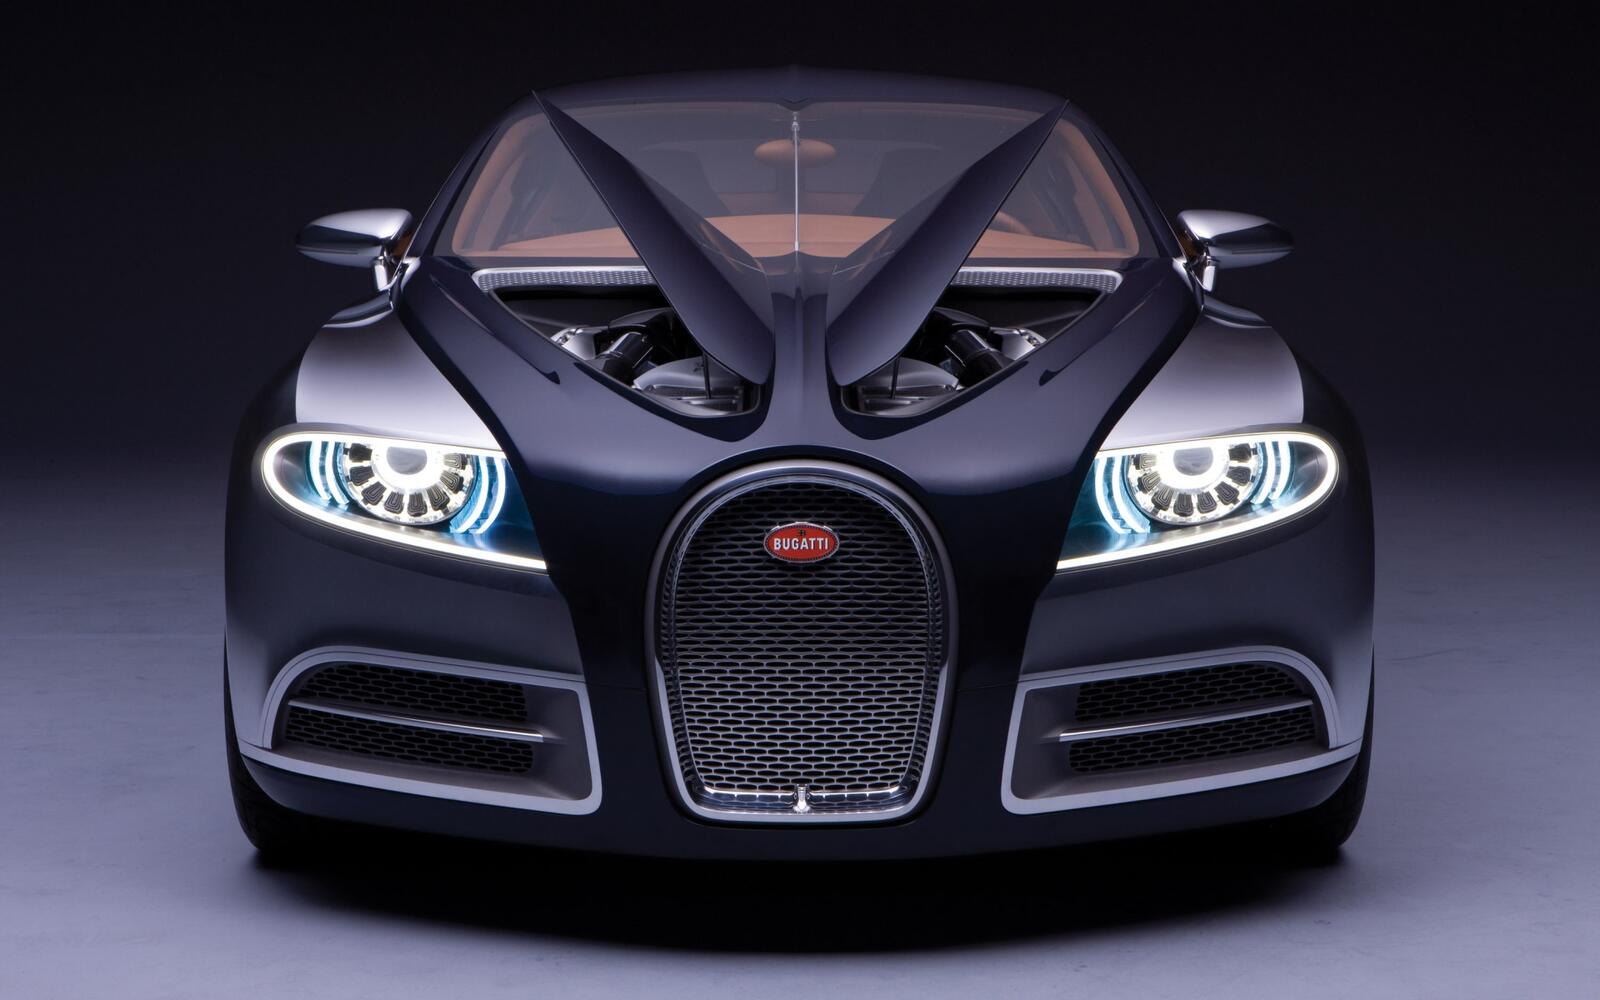 Wallpapers bugatti concept view on the desktop